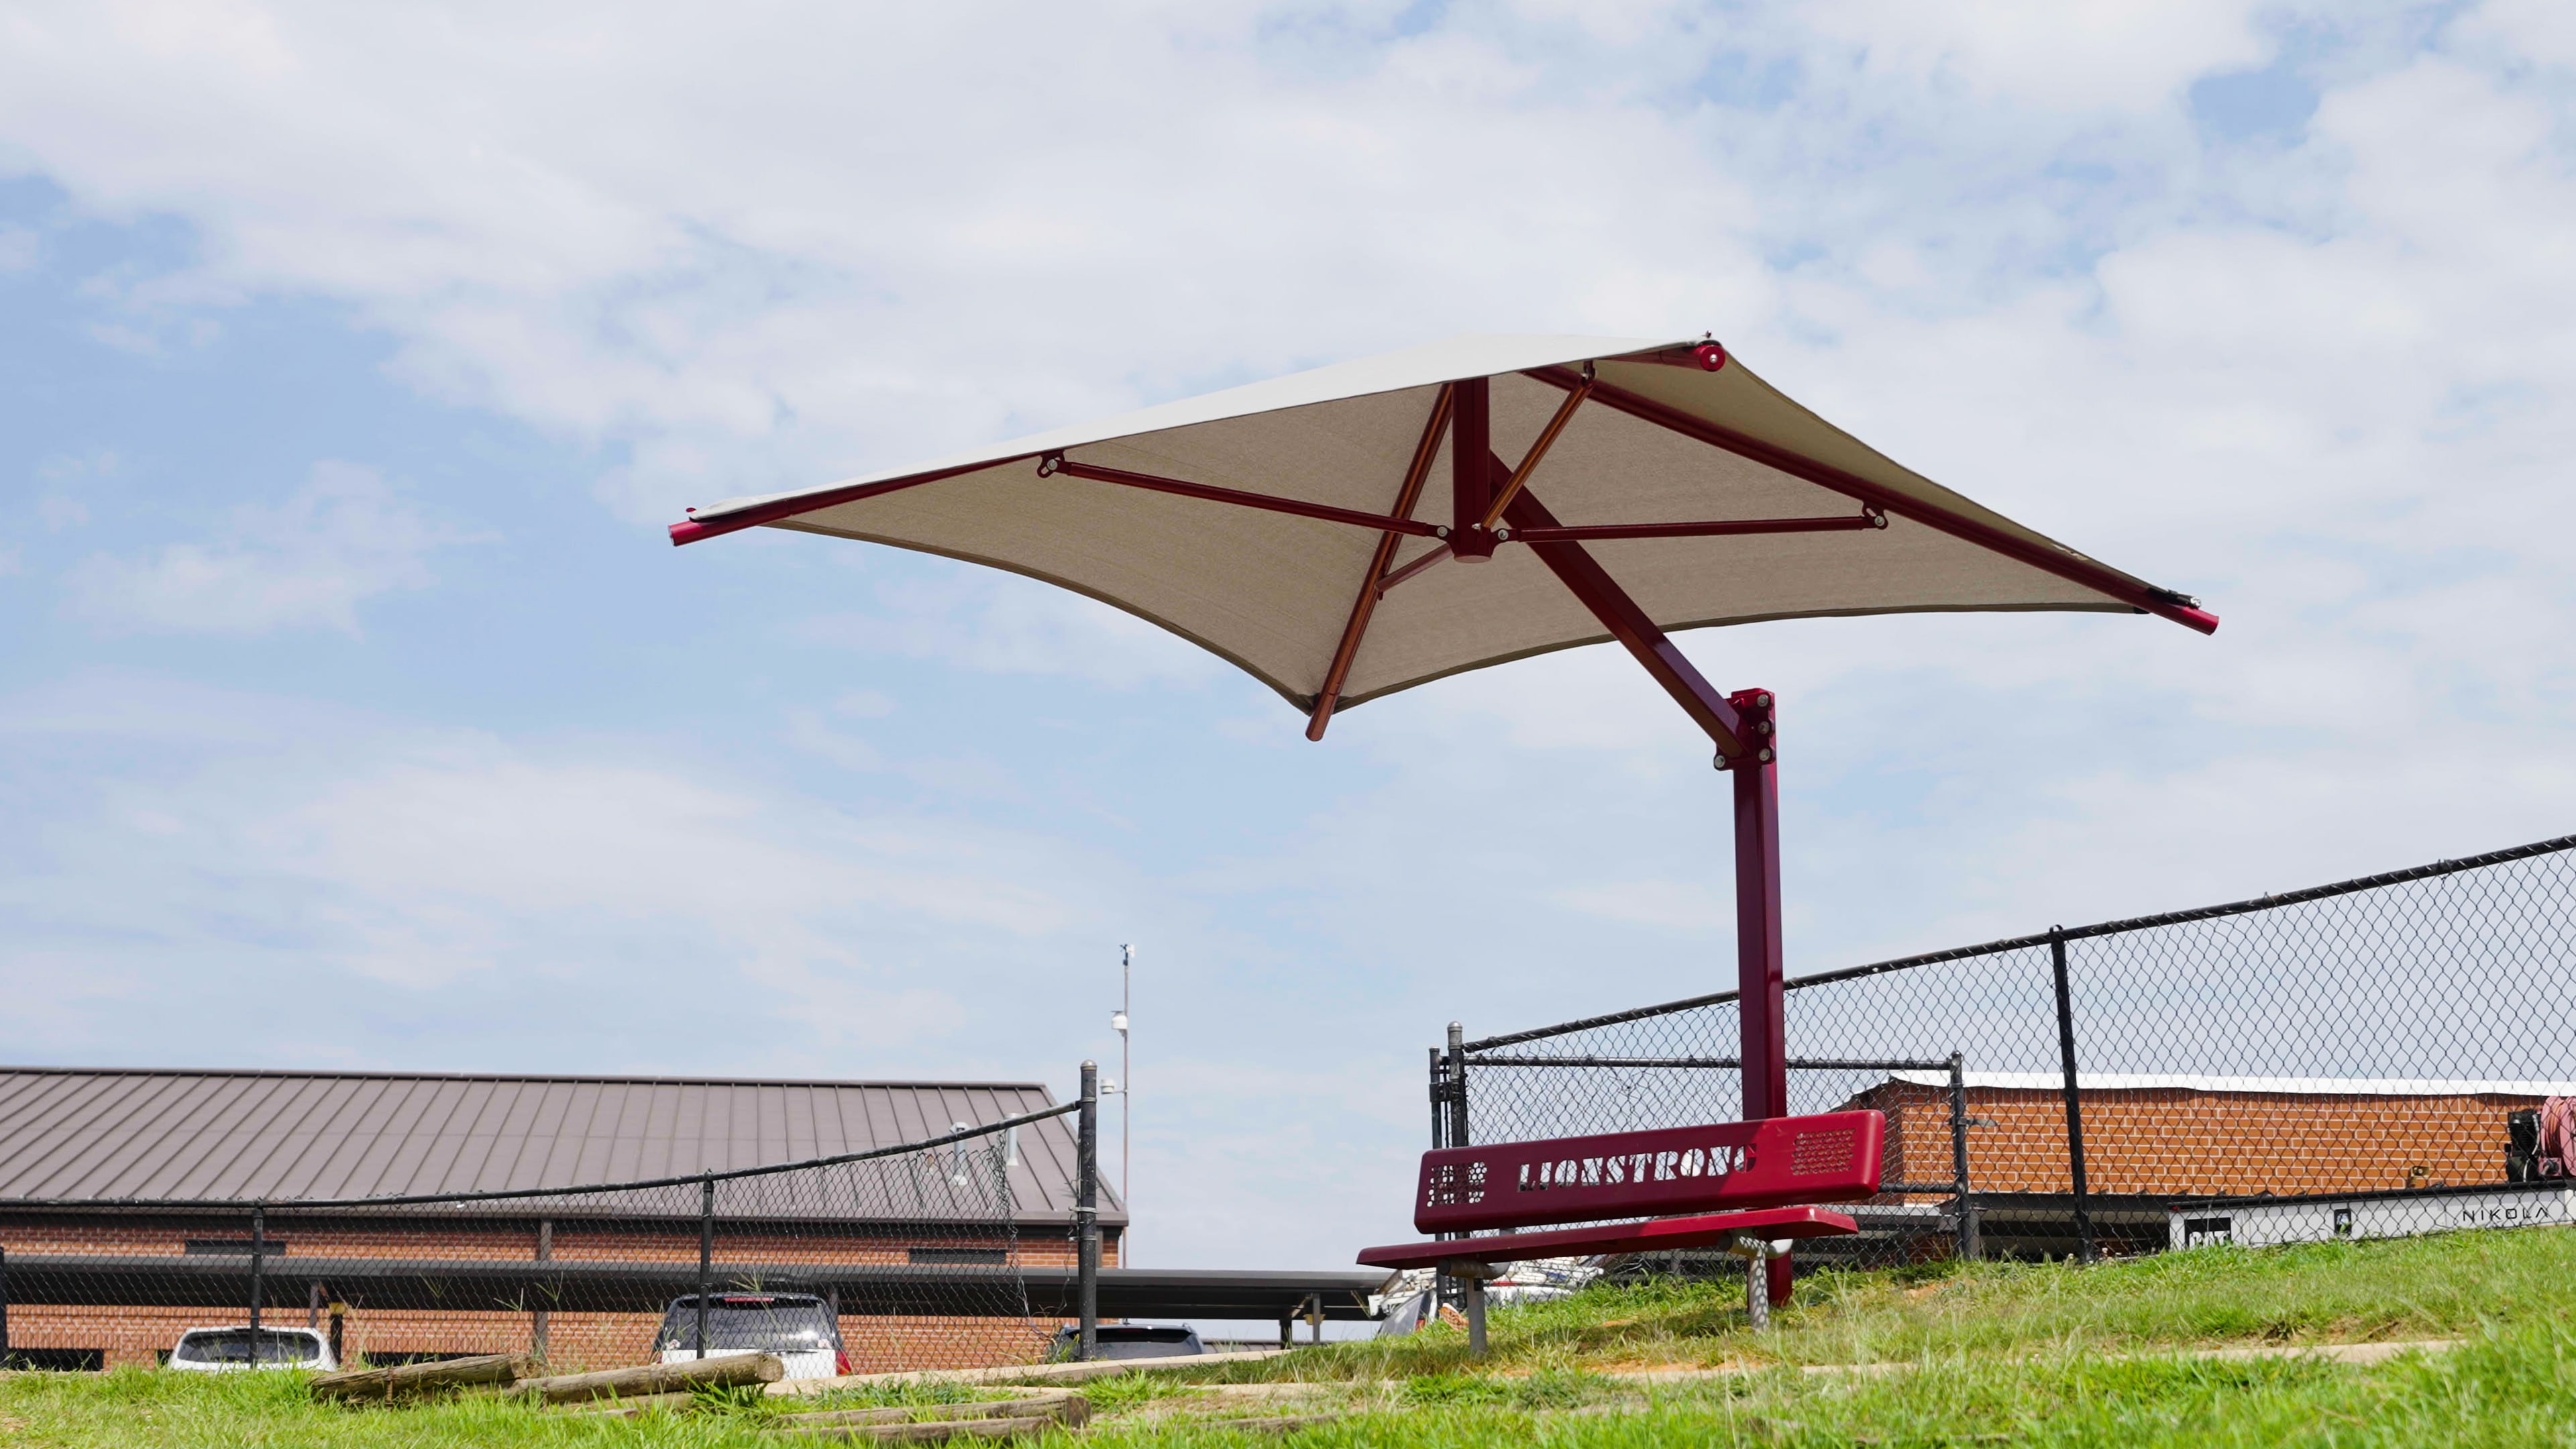 How To Install a Cantilever Umbrella Style Commercial Shade